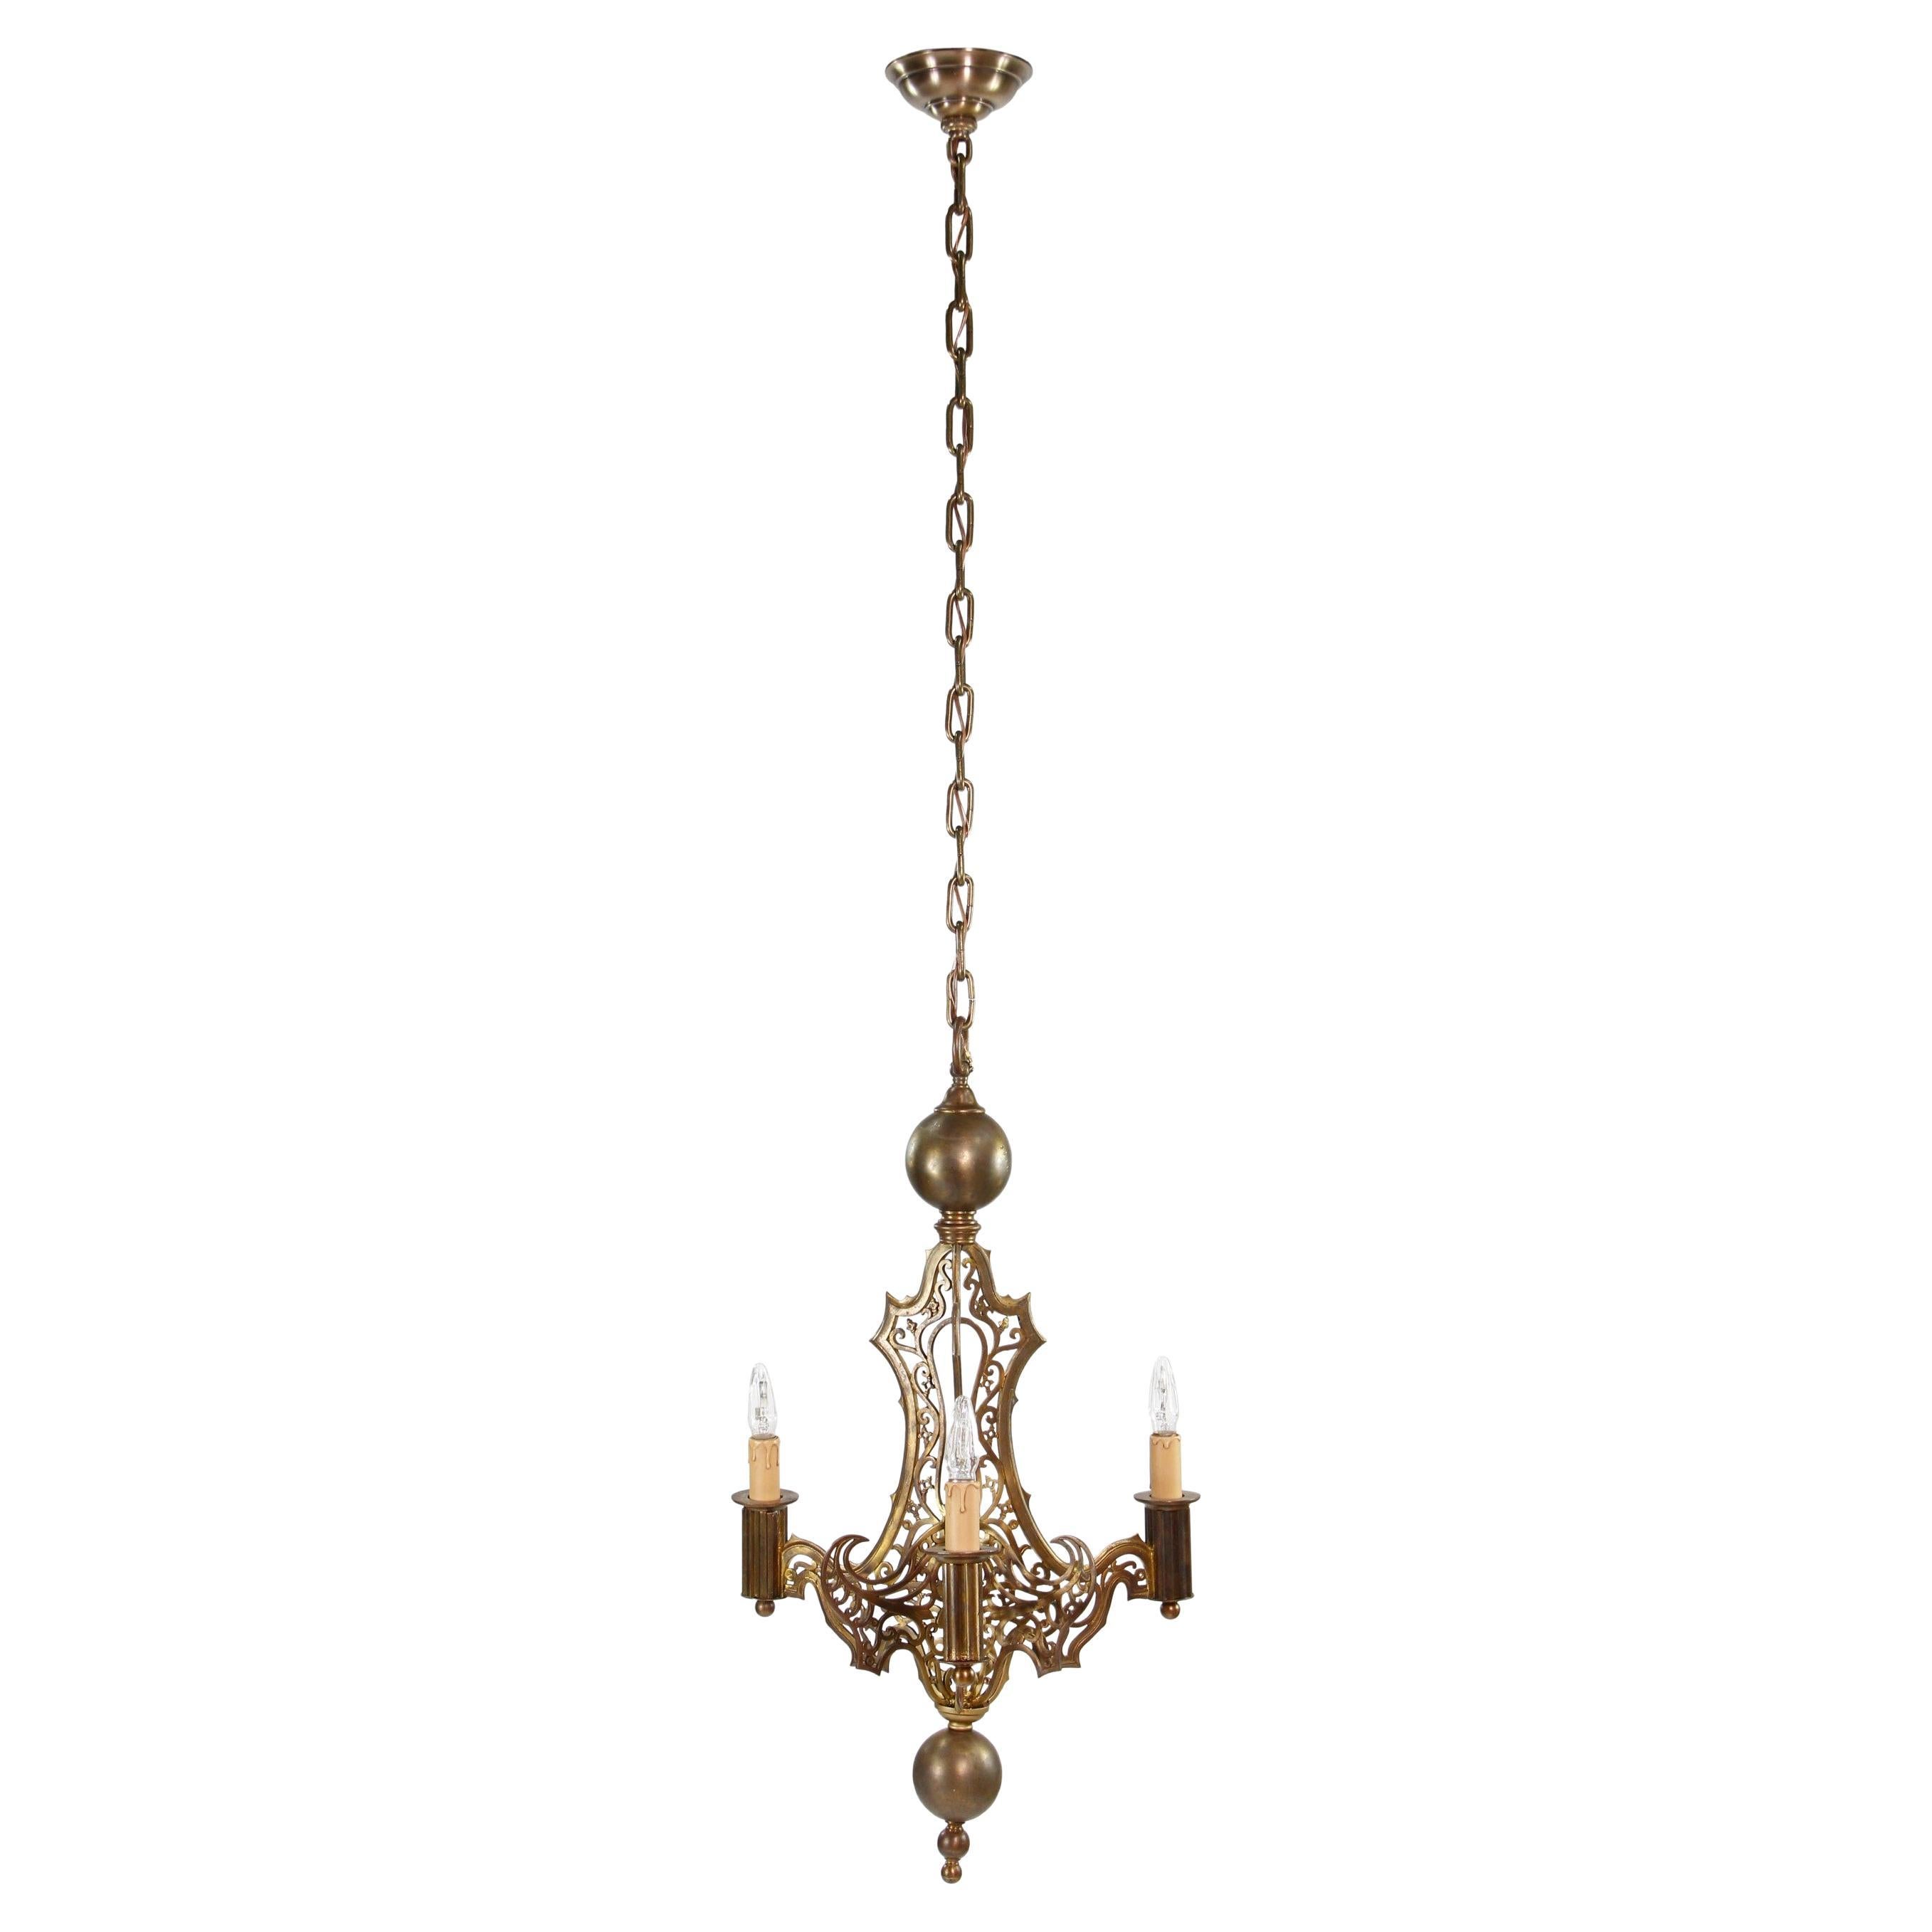 Restored Antique Ornate Bronze Gothic 3 Arm Chandelier Qty Available